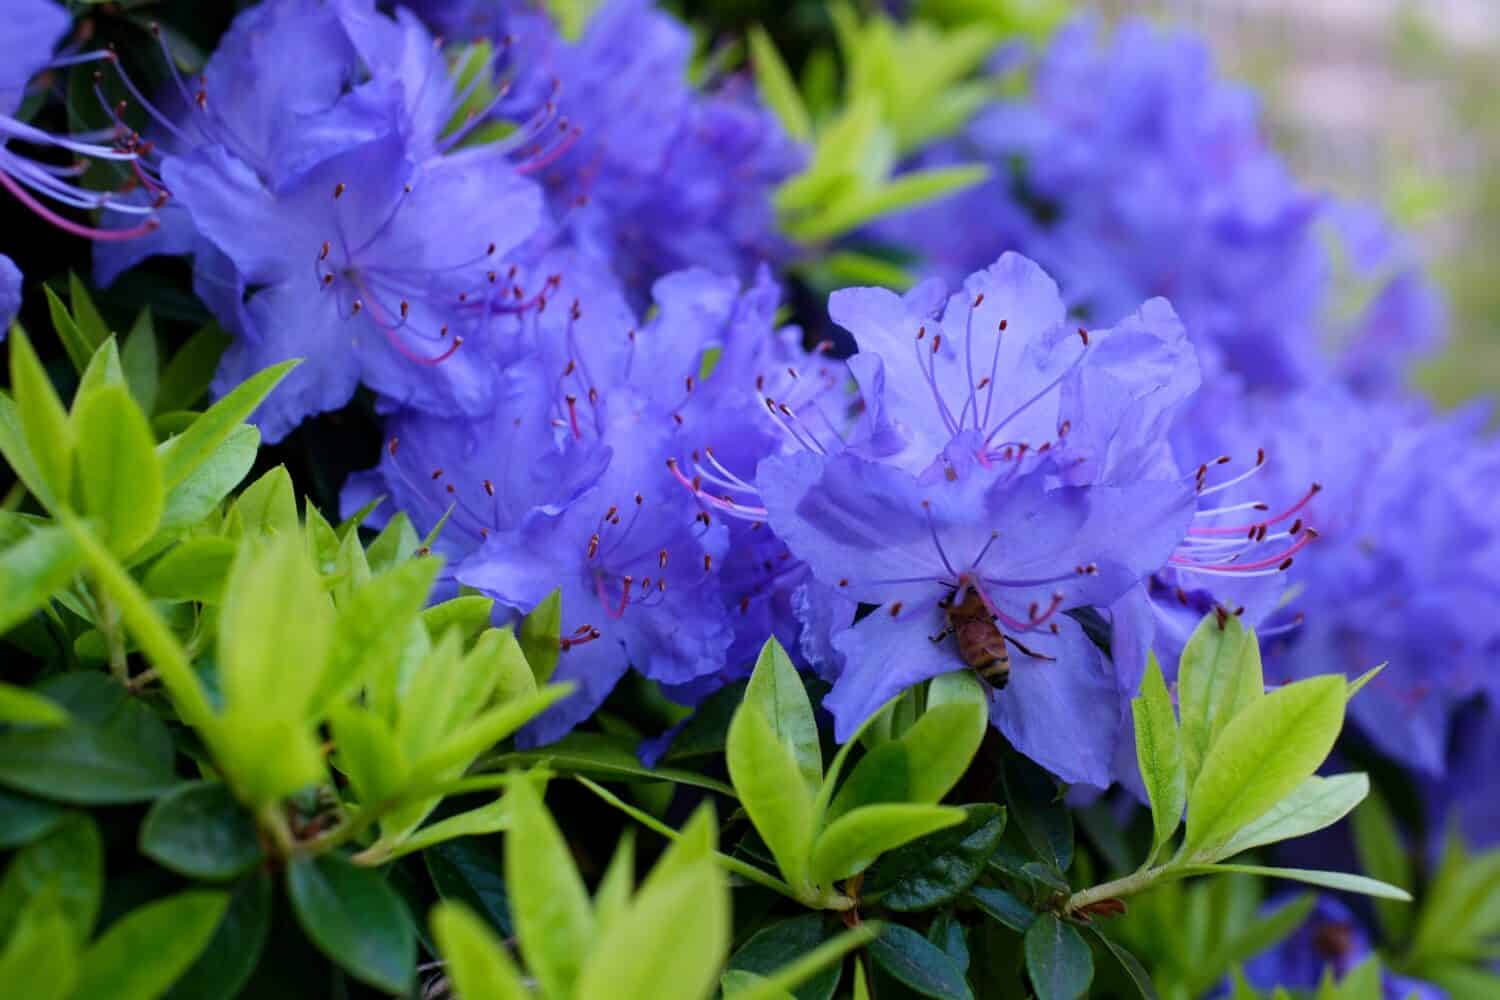 An amazing, low-growing evergreen shrub that blooms with blue flowers in the spring. It thrives in sunny areas. It is classified as a dwarf rhododendron. Very small leaves Rhododendron blue diamond